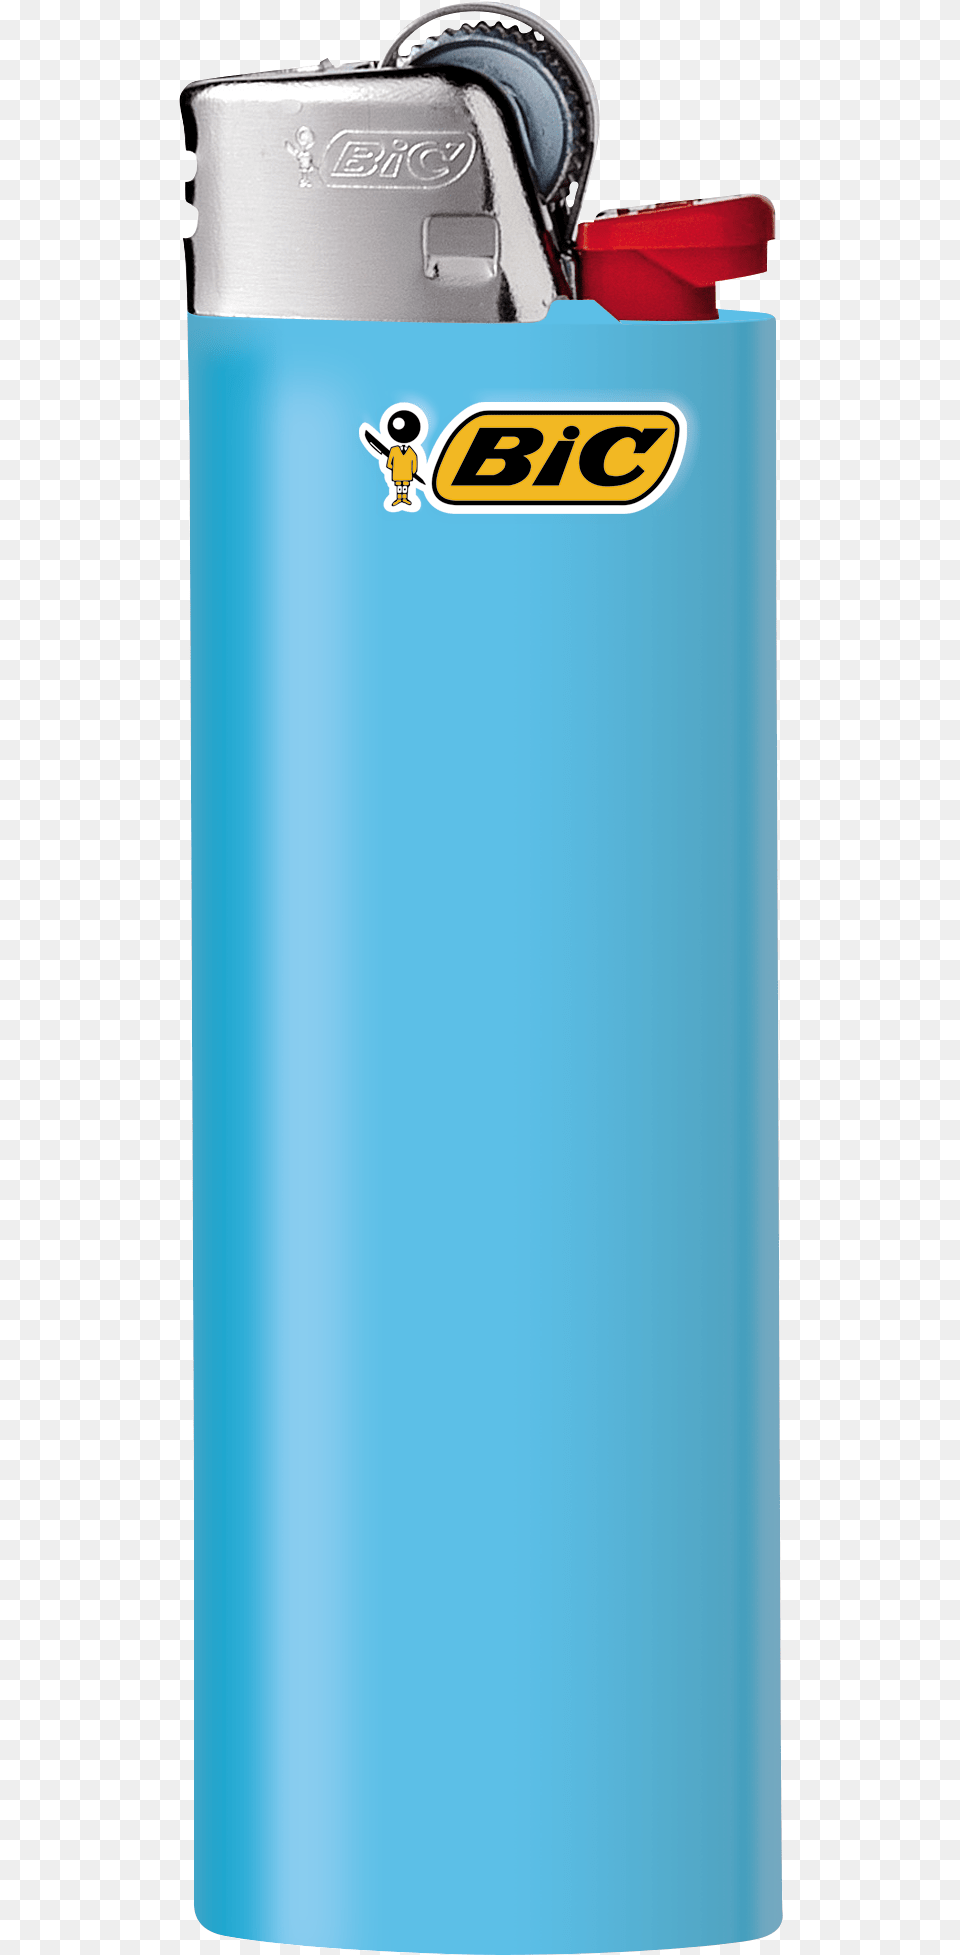 Bic J26 Maxi Lighter Ignites Up To A Maximum Of Approximately Bic Cristal Grip Ball Pen Blue Free Png